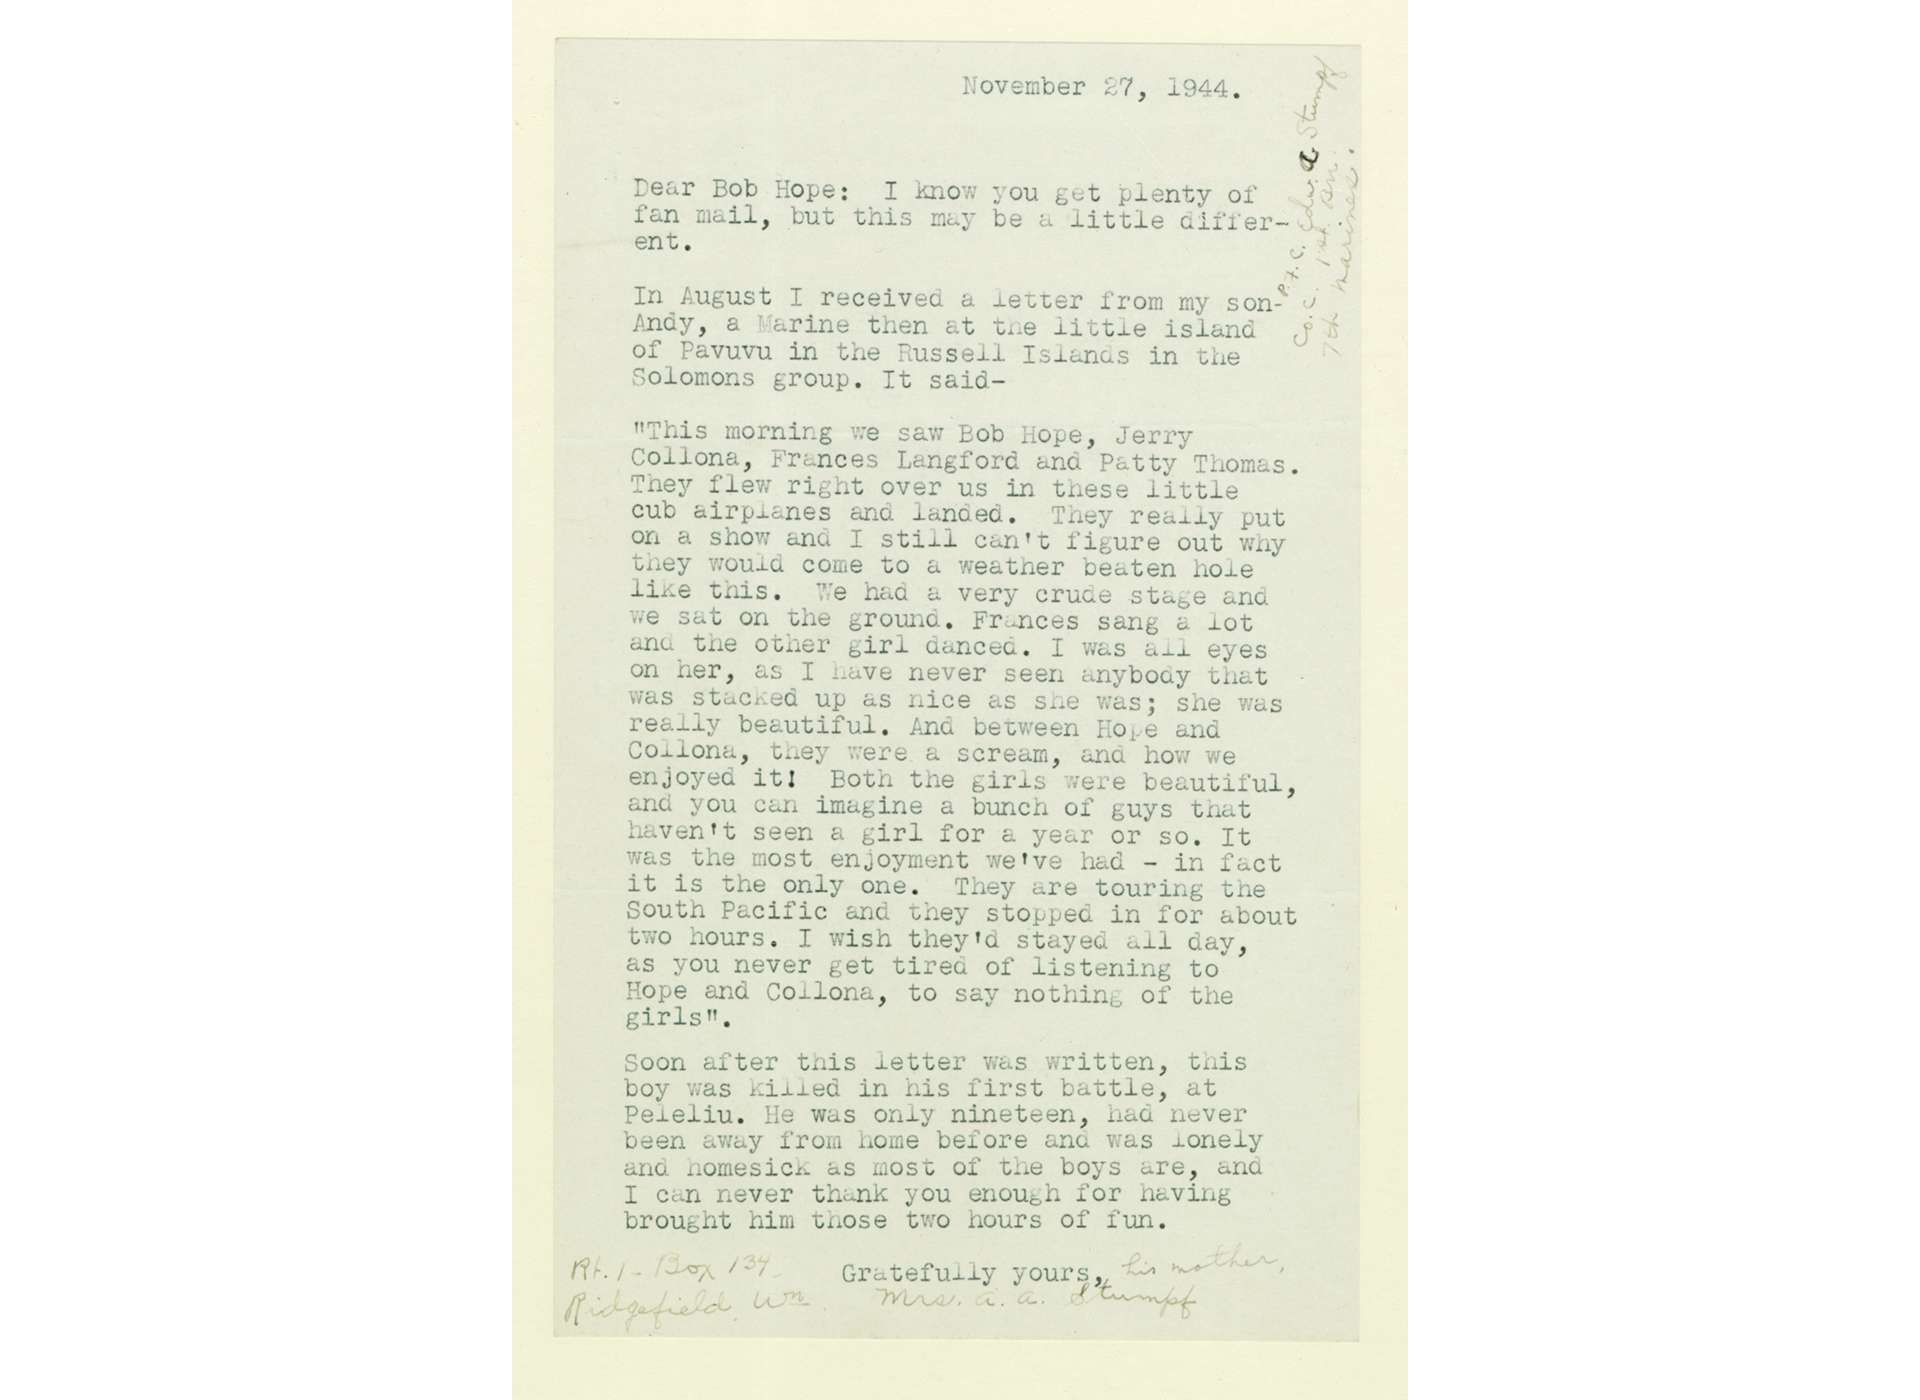 Letter to Bob Hope from Mrs. A. A. Stumpf